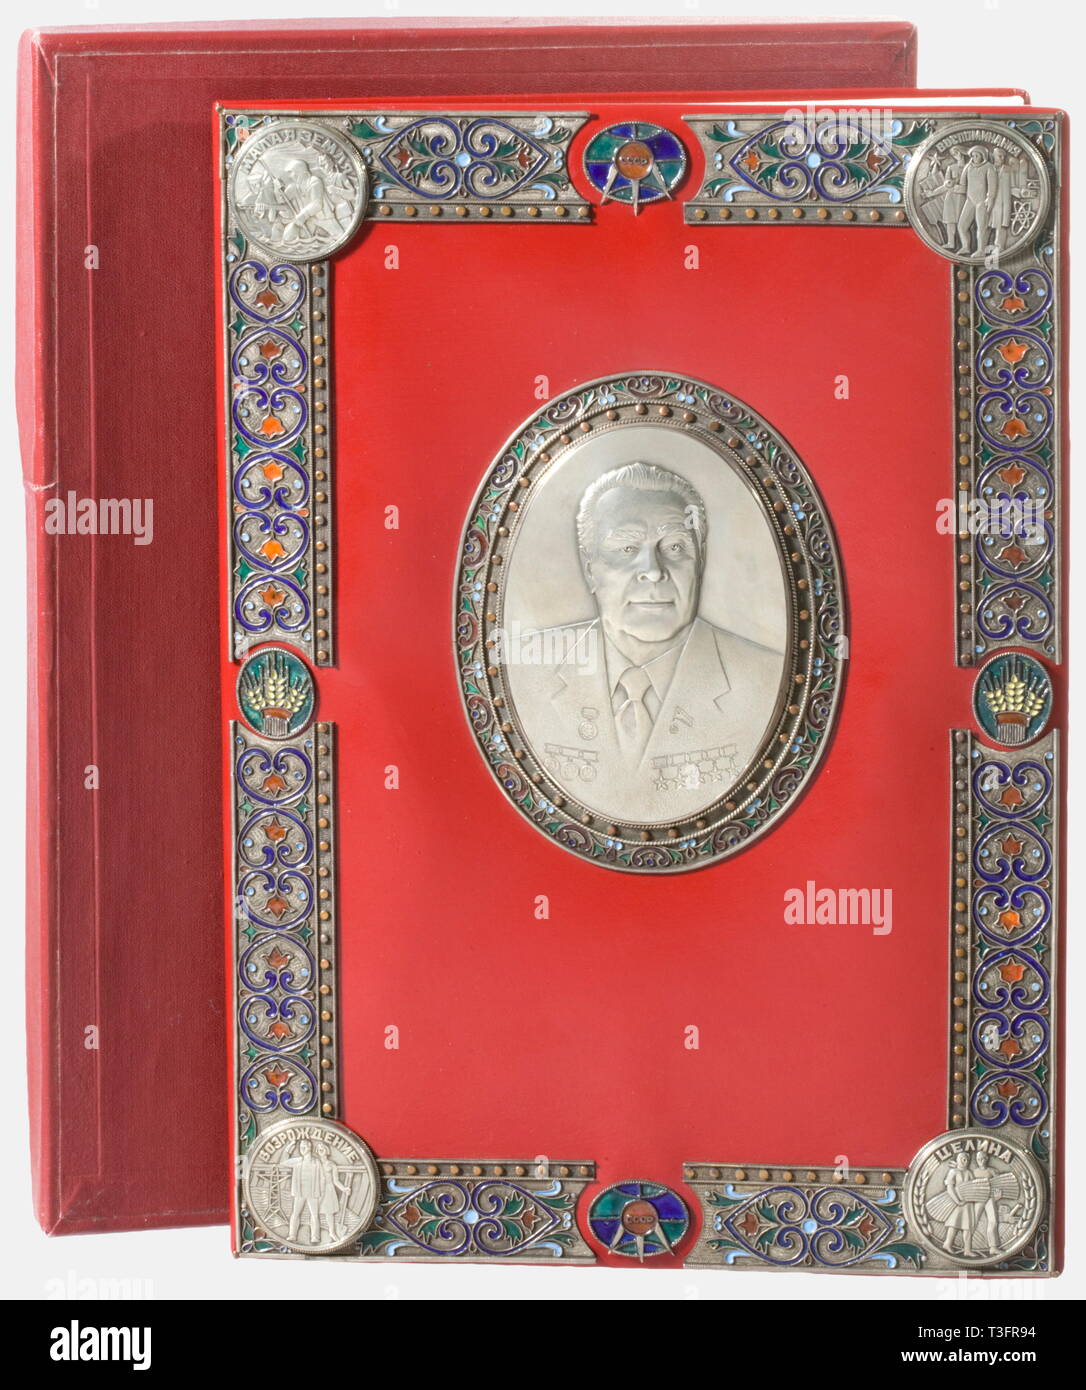 Leonid Ilyich Breshnev (1906 - 1982), a presentation folder for his literary trilogy Red artificial leather folder with nickel-silver mountings, partially engraved and enamelled with floral designs, and with his nickel-silver portrait in the centre. Four agates in settings on the back. Dimensions 35 x 25.5 cm. In the original red box. The Breshnev trilogy (1978 - 79), which was published under Breshnev's name to improve his public image, consists of three autobiographical novels ('Malaya Zemlia', 'Vzroshdenie', 'Zelina'). Although not the author , Additional-Rights-Clearance-Info-Not-Available Stock Photo